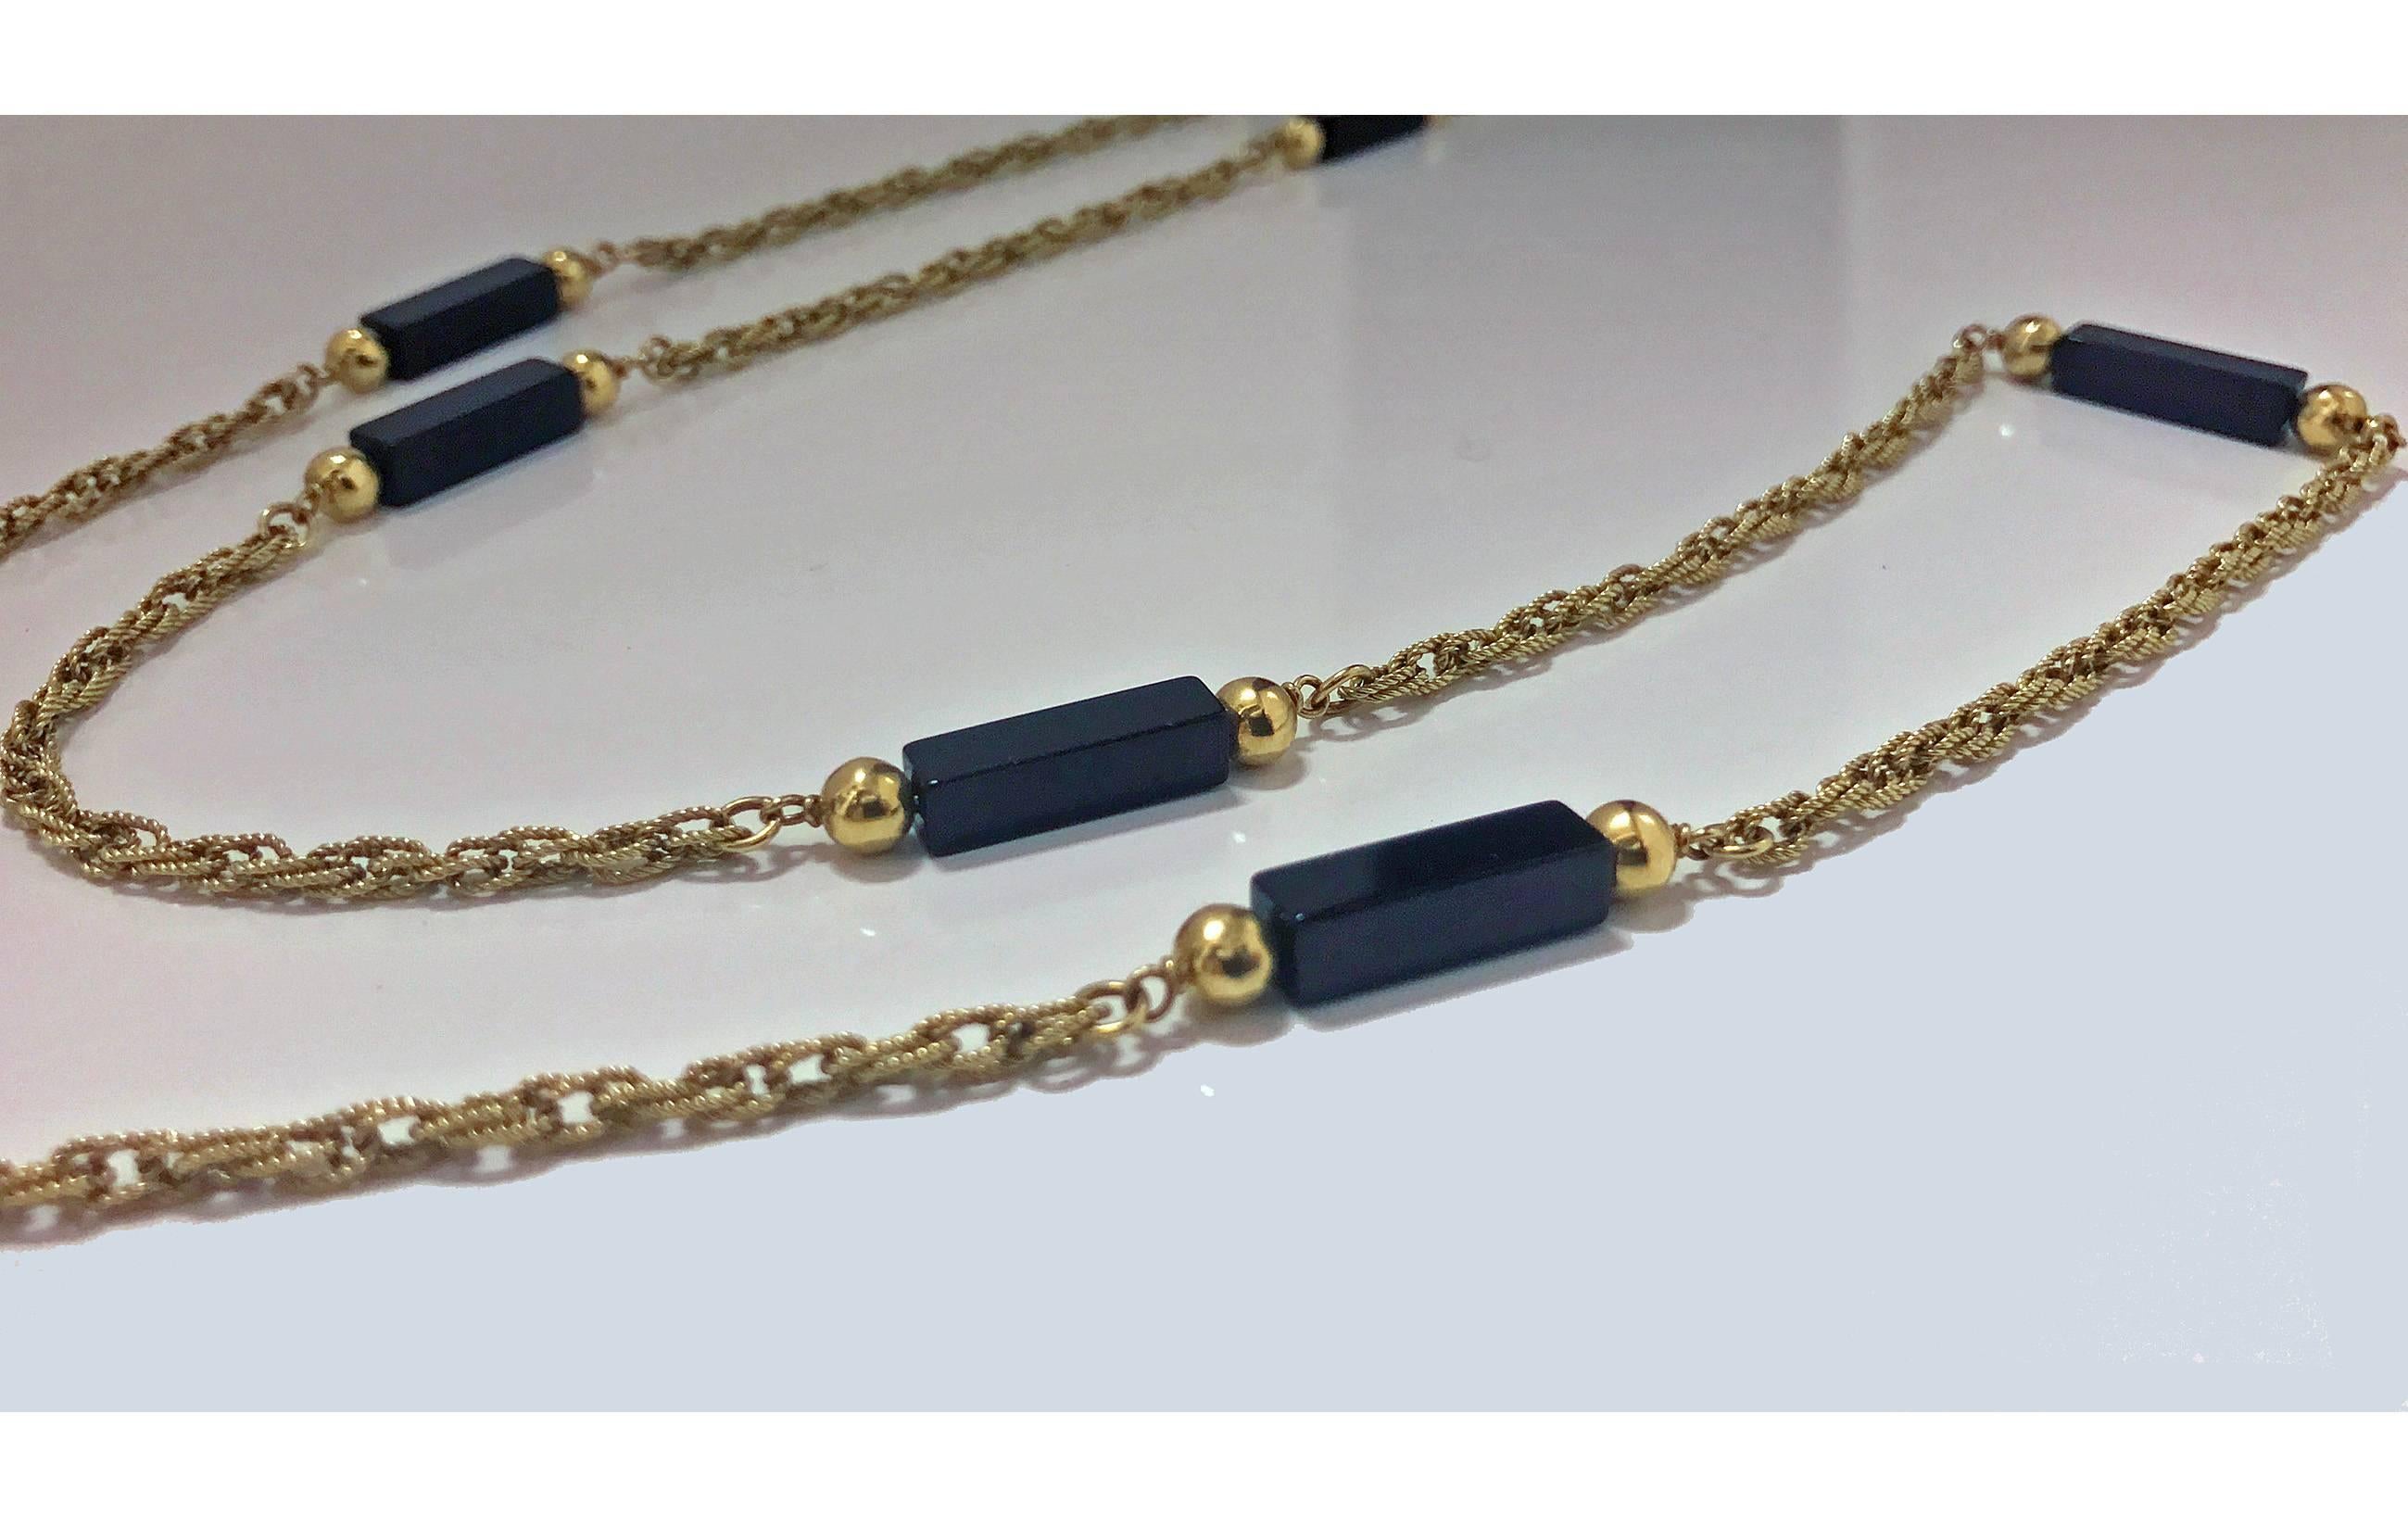 18K black onyx Necklace Chain, 20th century. The intertwining rope link chain interspaced with eight black onyx bar links accented on either side with gold ball, box link clasp, safety catch attached. Stamped 750 with trademark pine tree. Length: 36